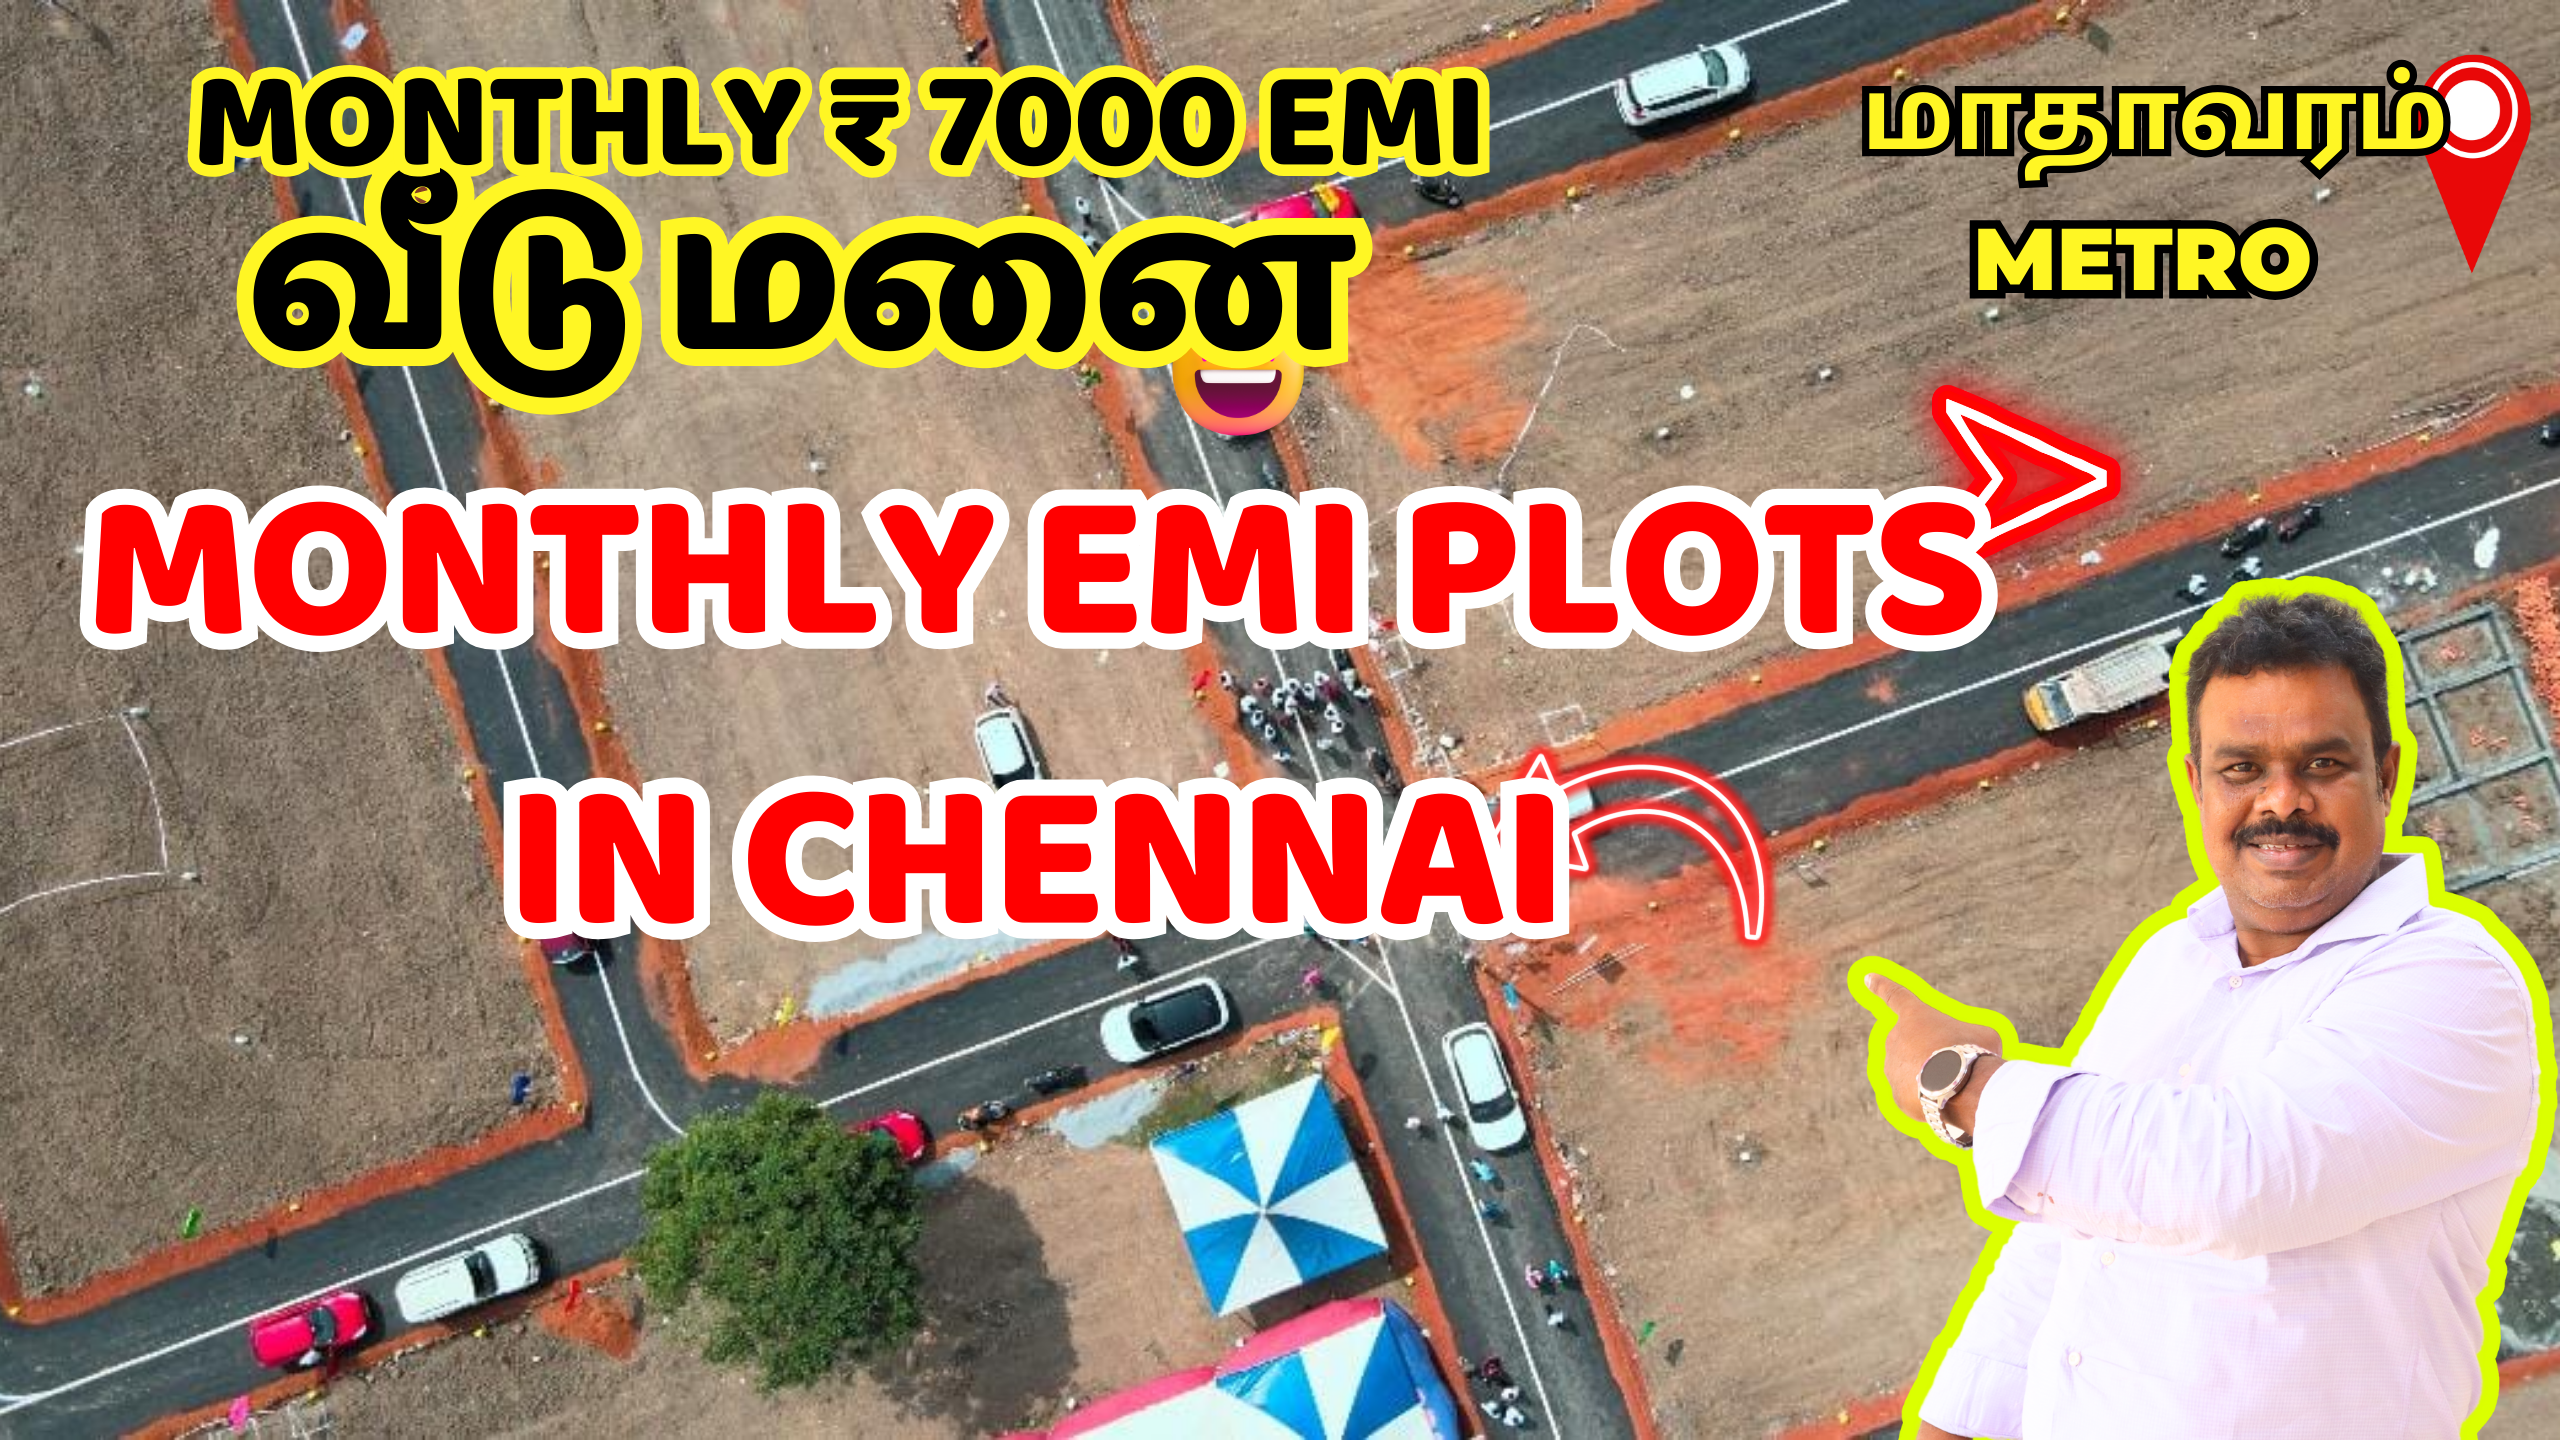 Buy Monthly EMI plots in Chennai-Ready to invest in your future?